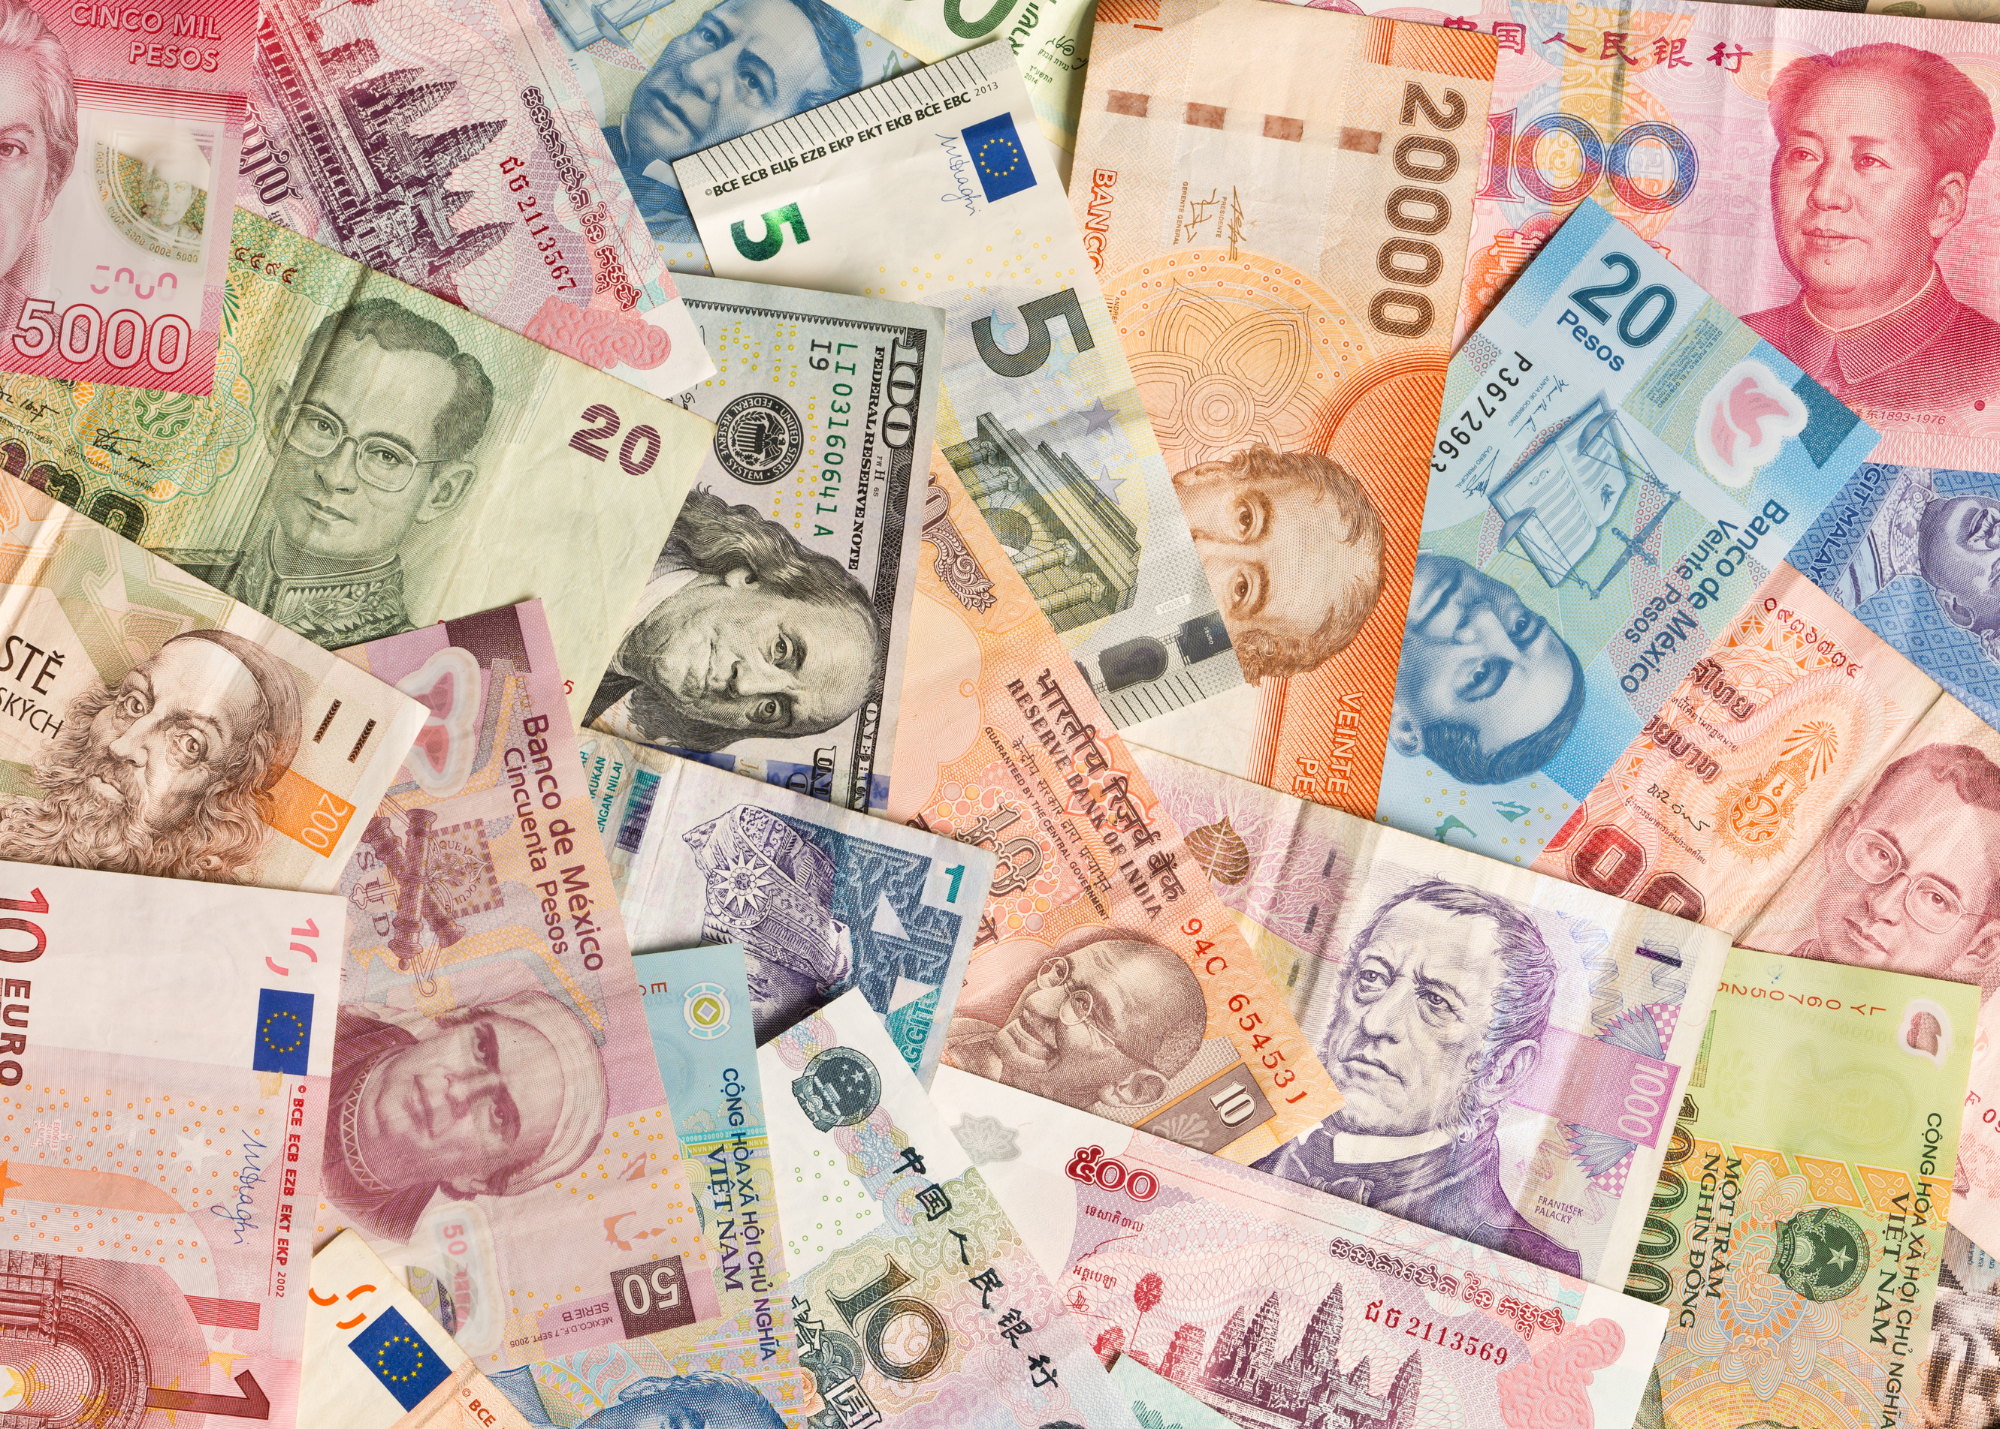 The Top 10 Currencies in the World & Their Security Features